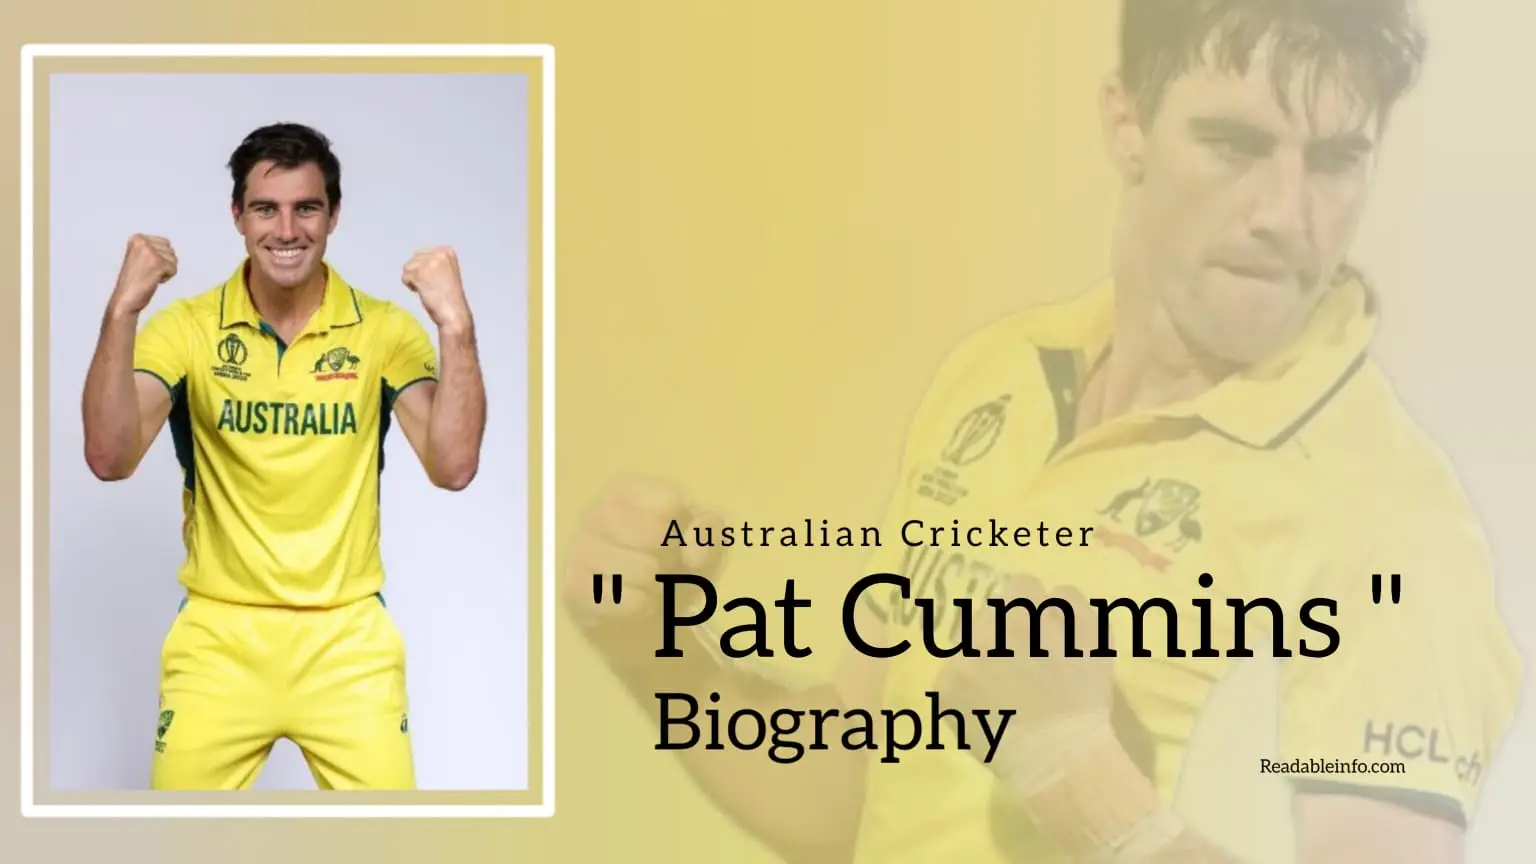 You are currently viewing Pat Cummins Biography (Australian Cricketer)